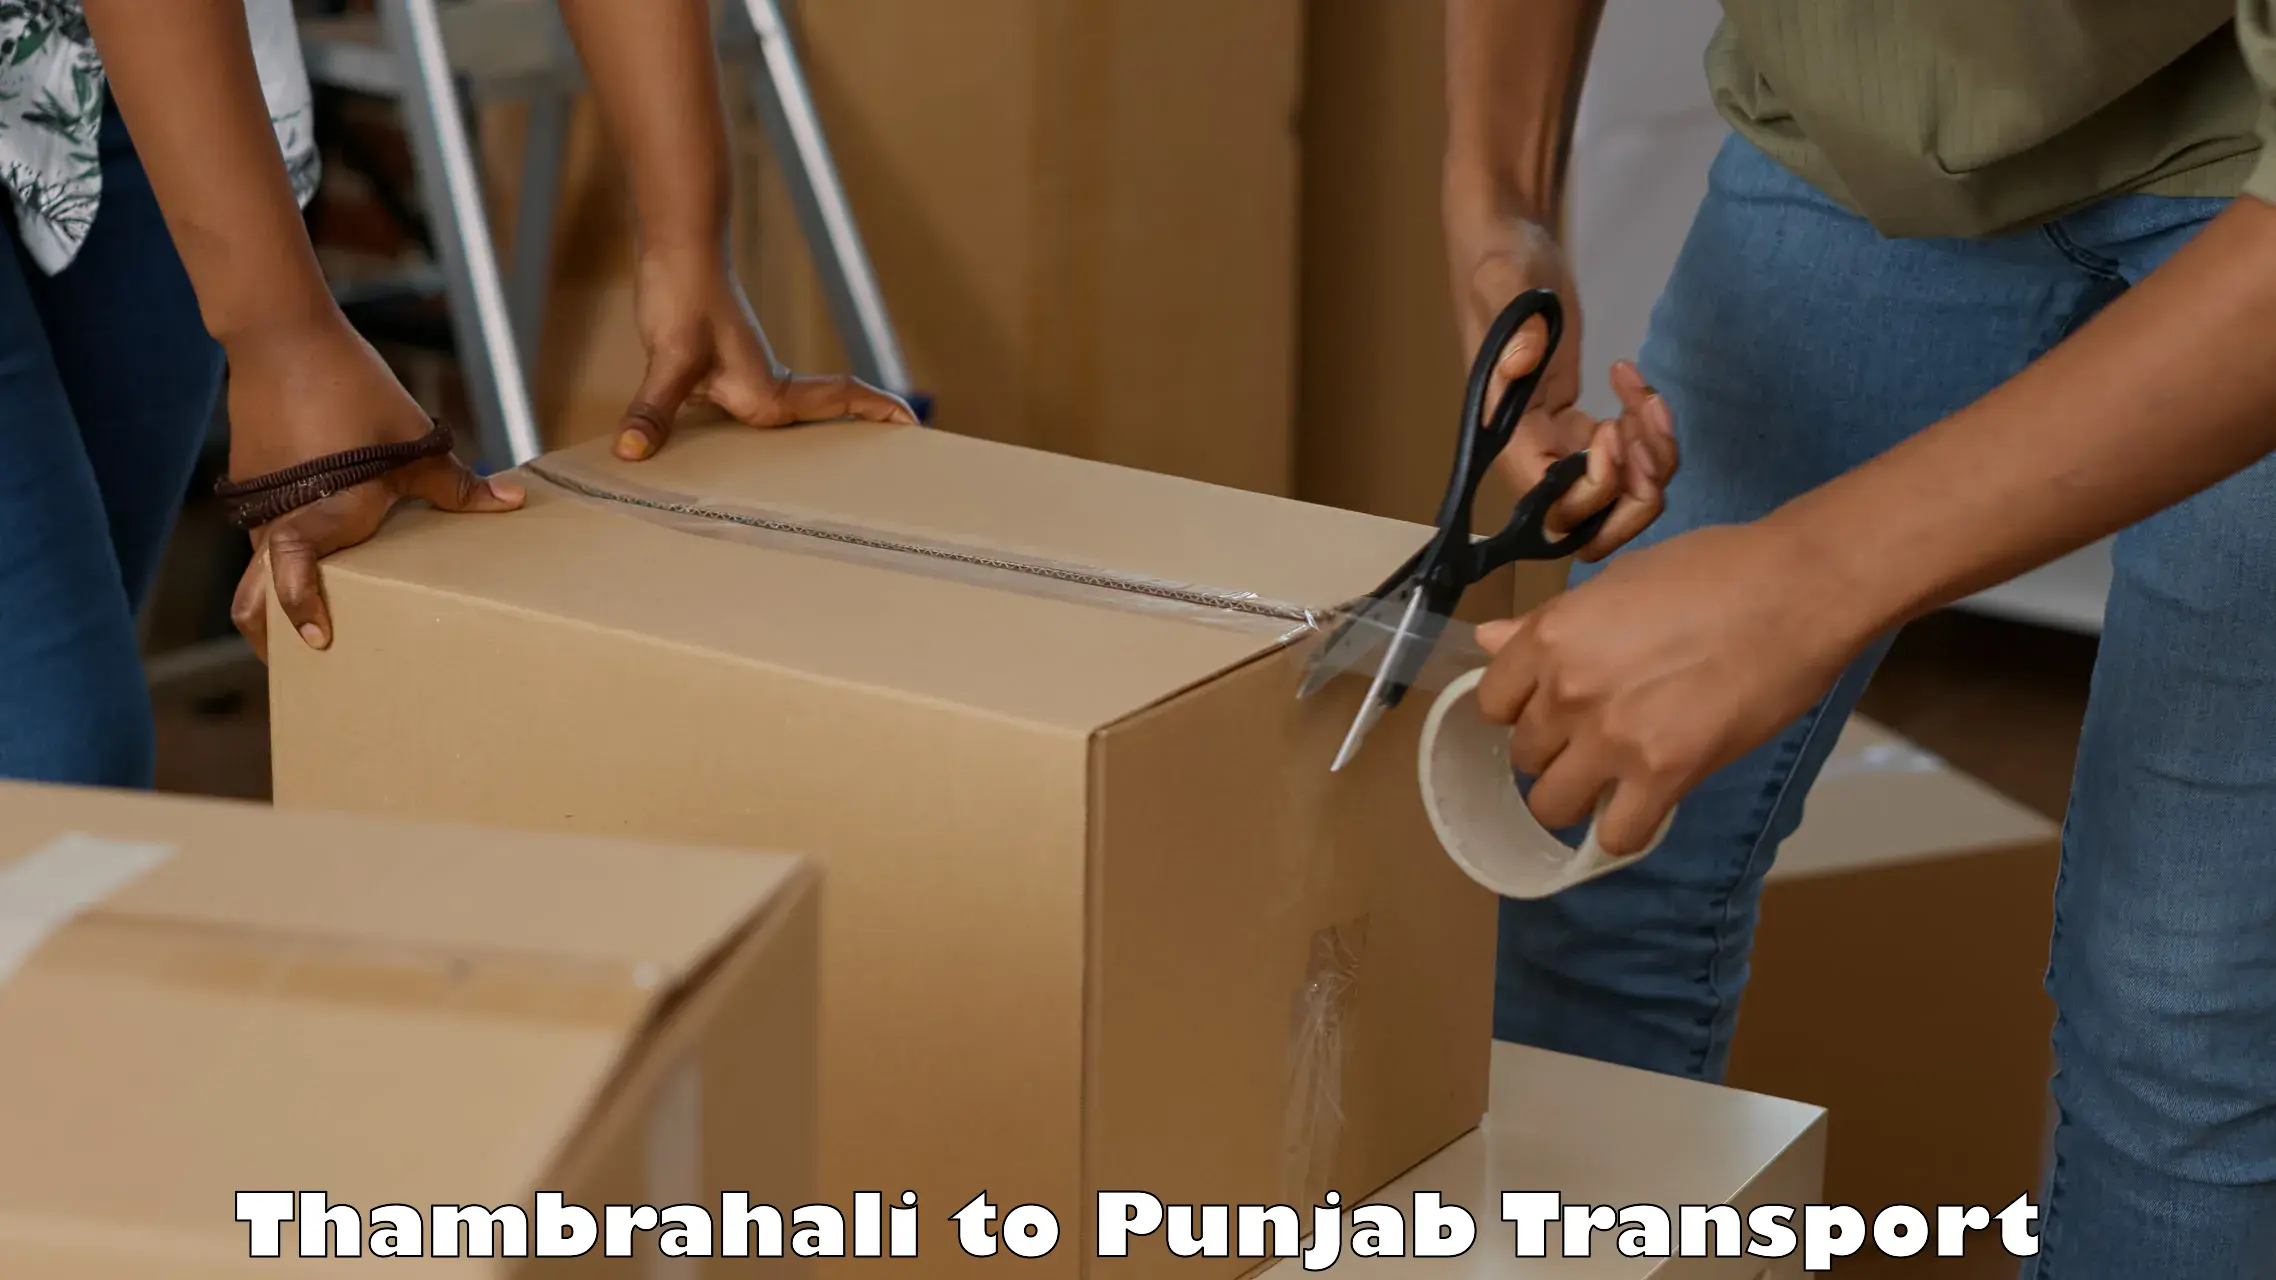 Parcel transport services Thambrahali to Ludhiana